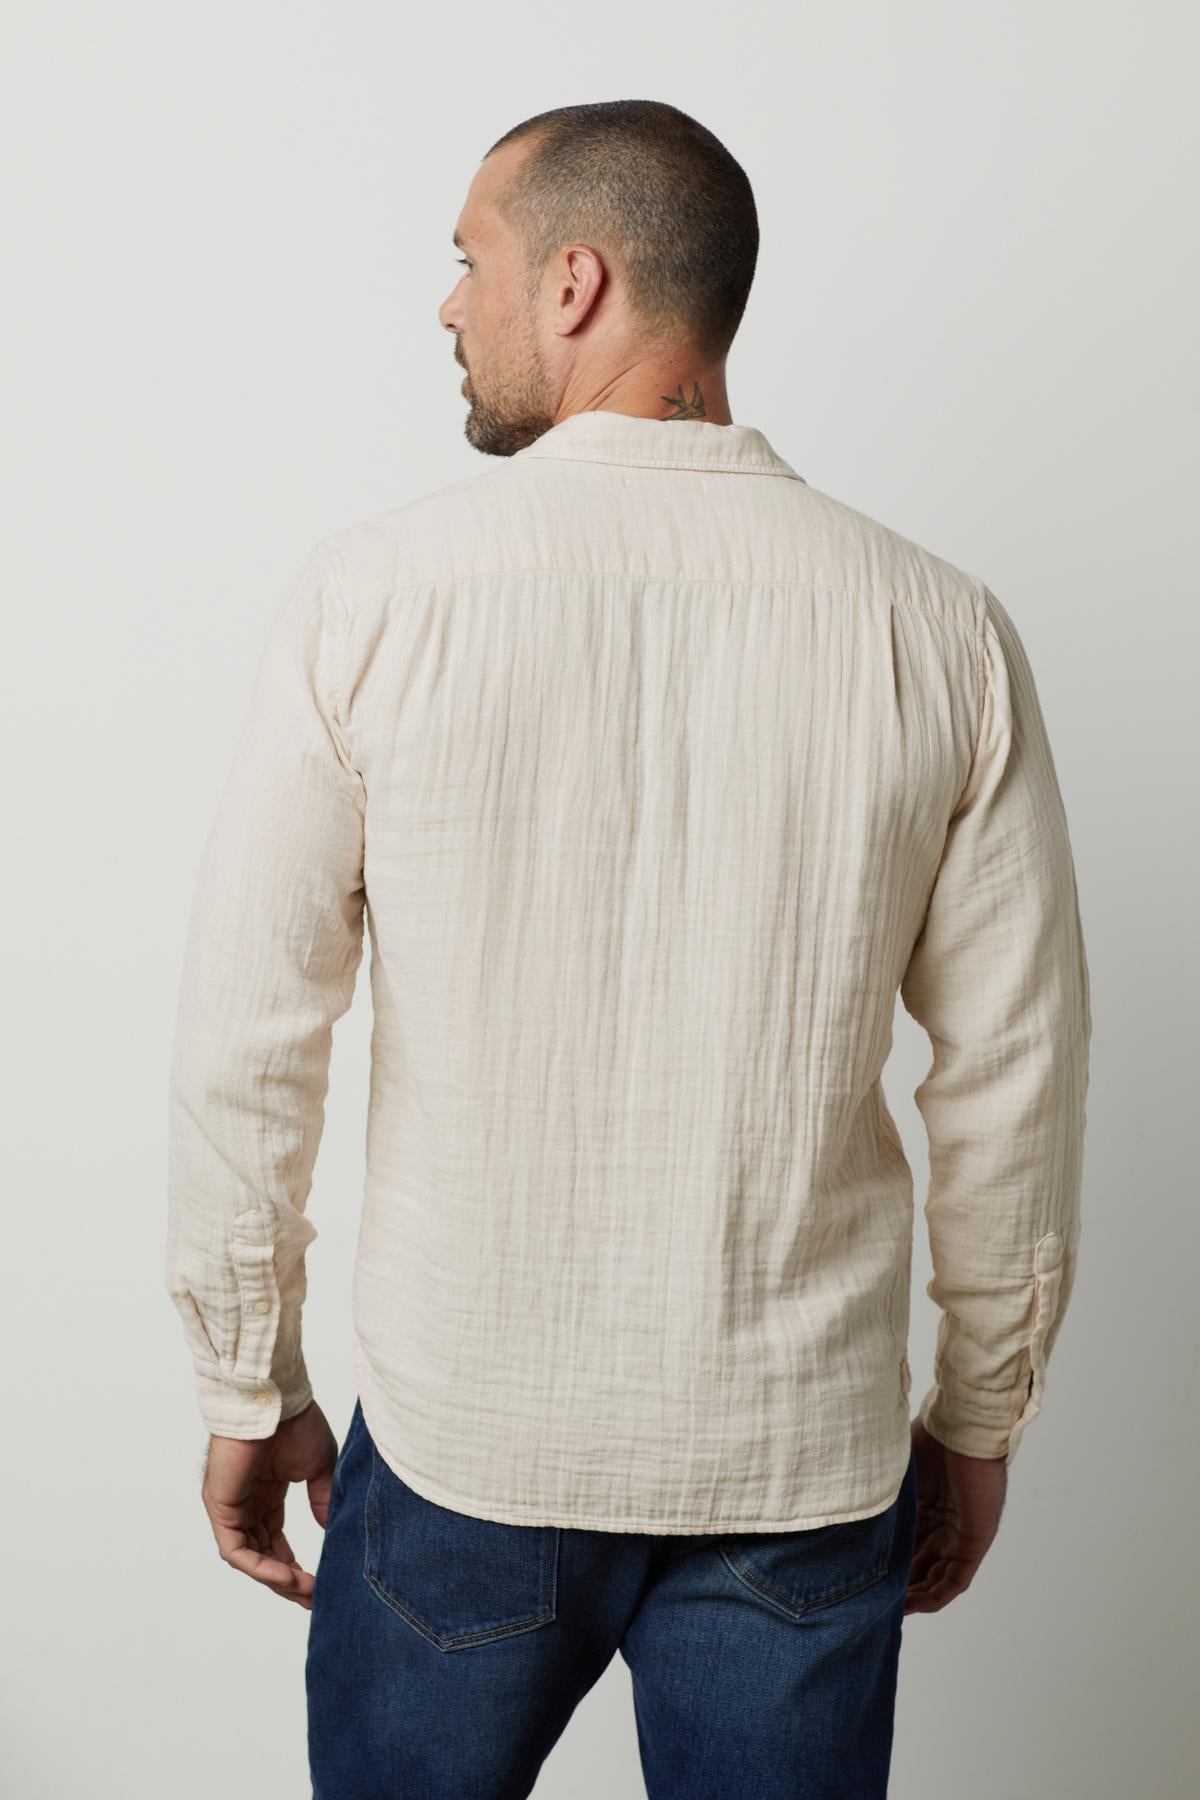 A man viewed from behind, wearing a Velvet by Graham & Spencer Elton Cotton Gauze Button-Up Shirt and blue jeans, standing against a white background.-36805210603713